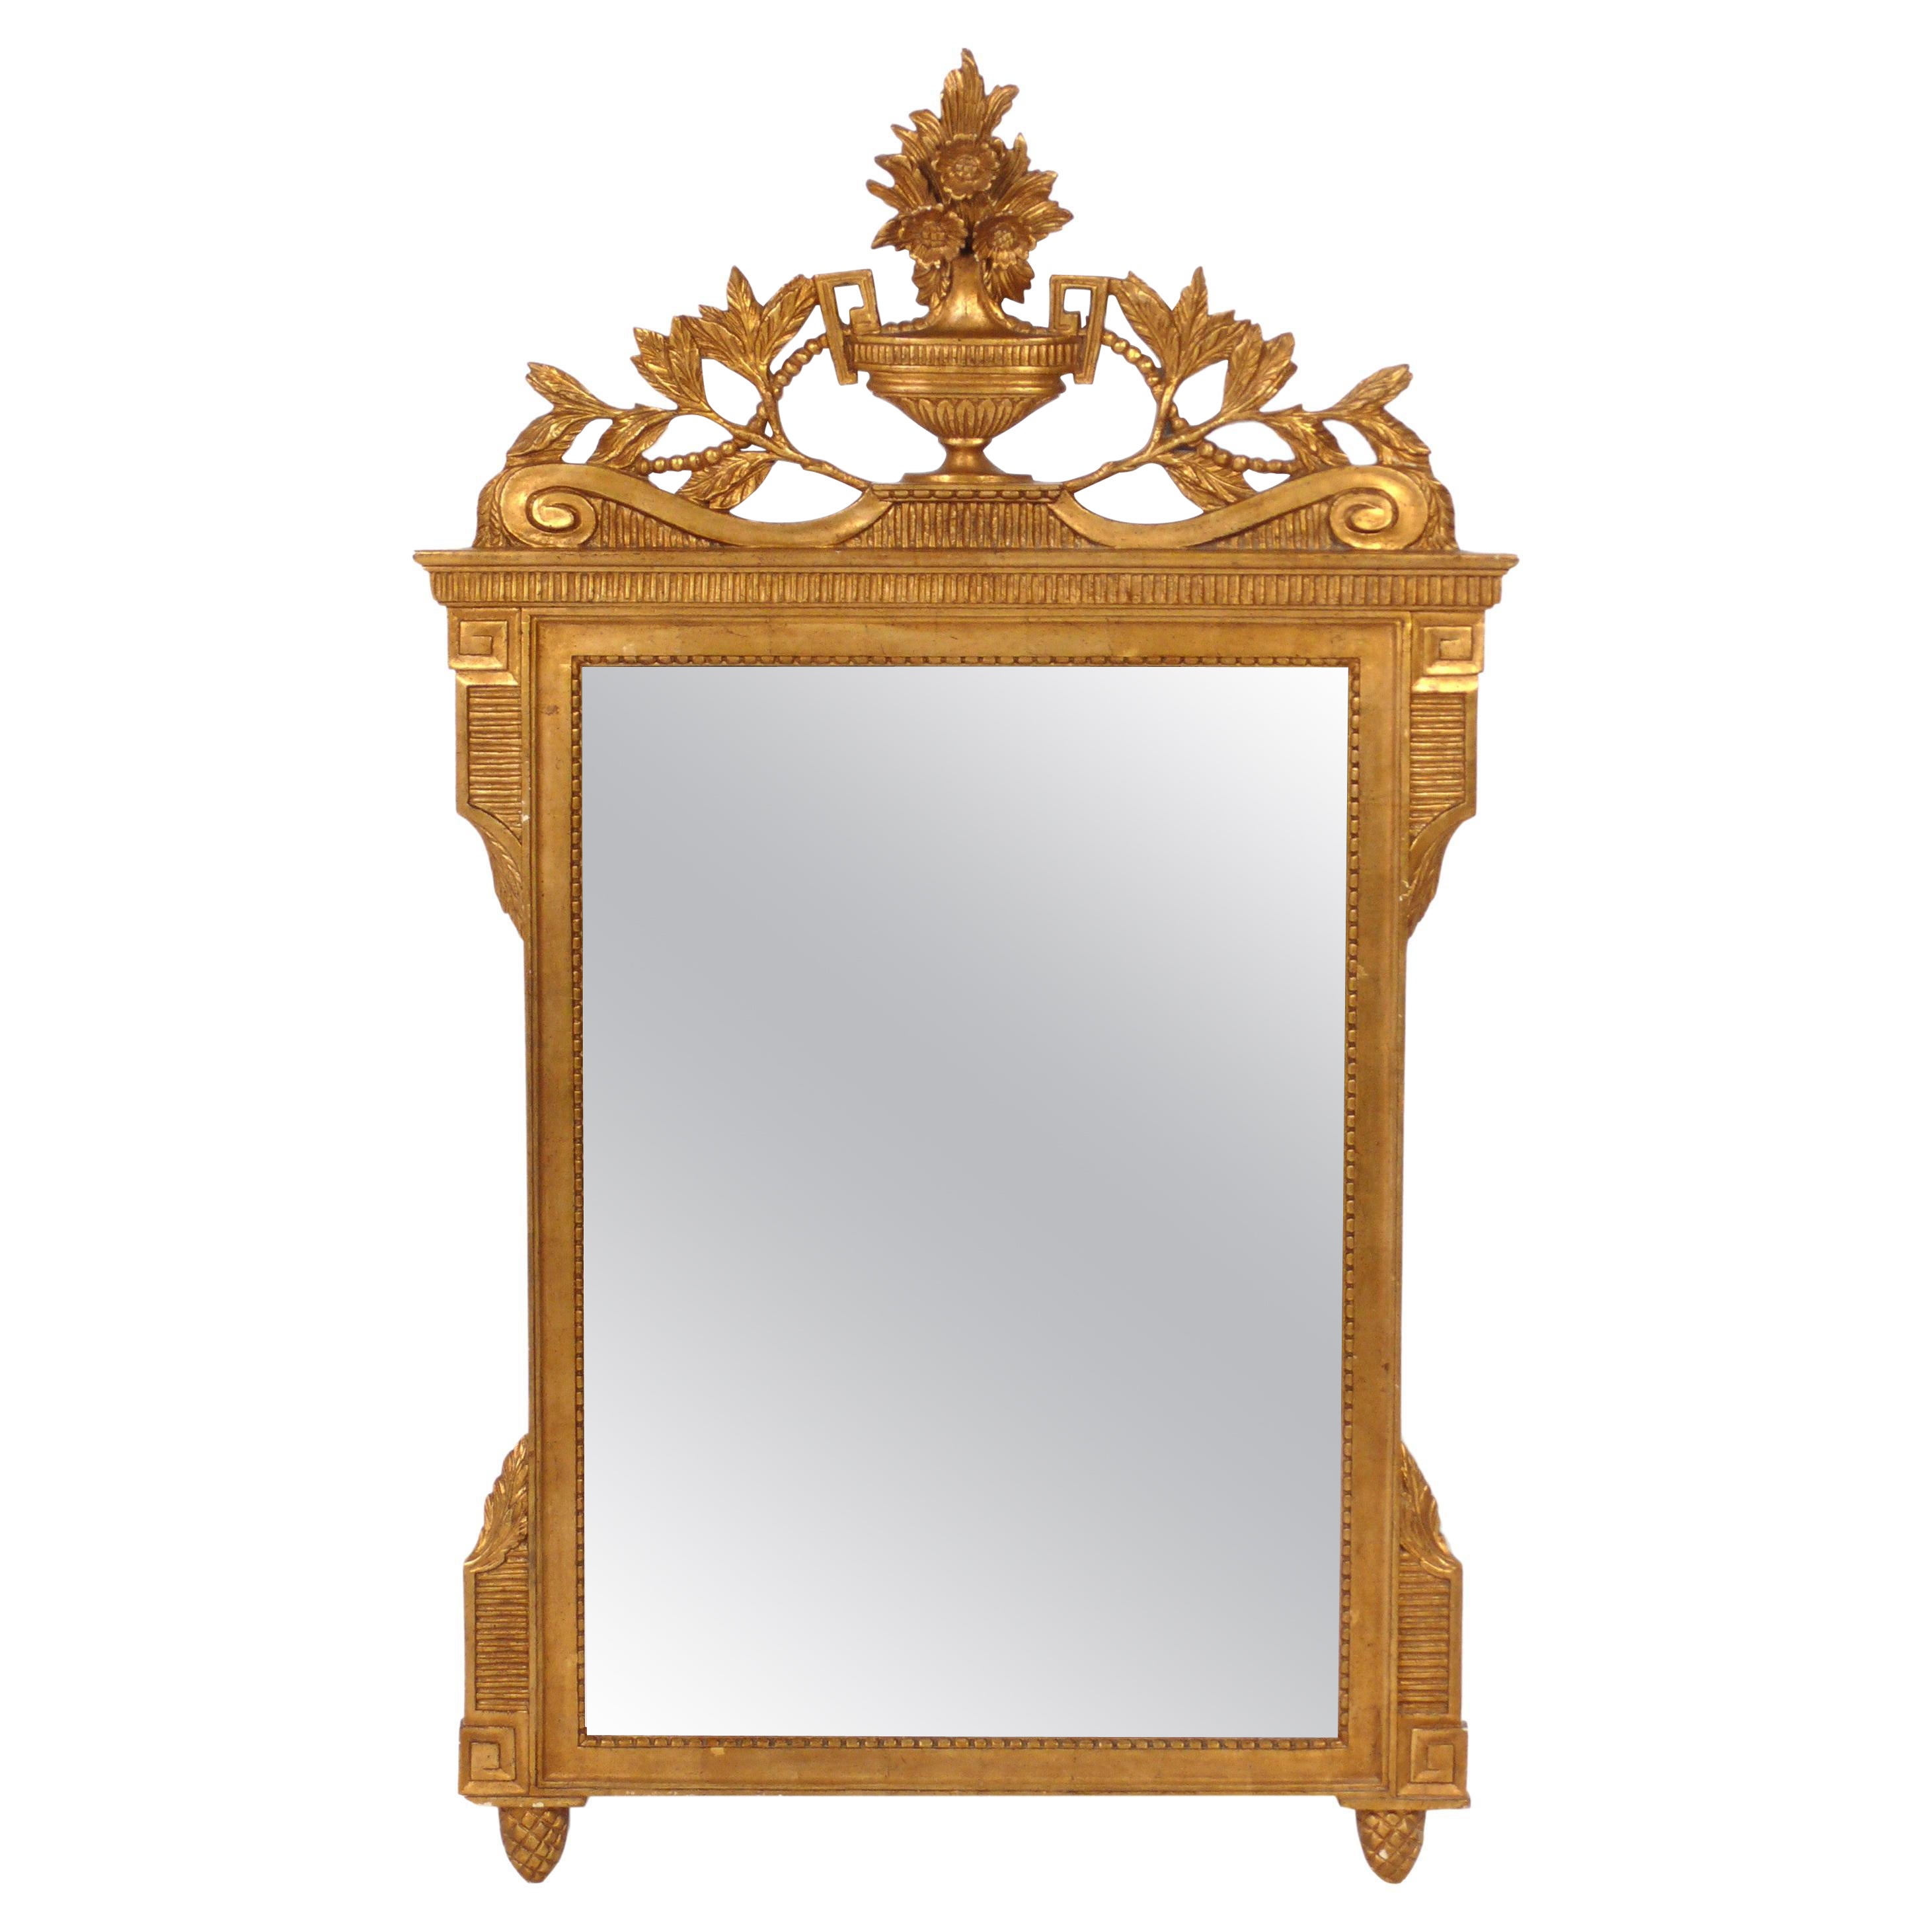 How can I tell if a mirror is antique?